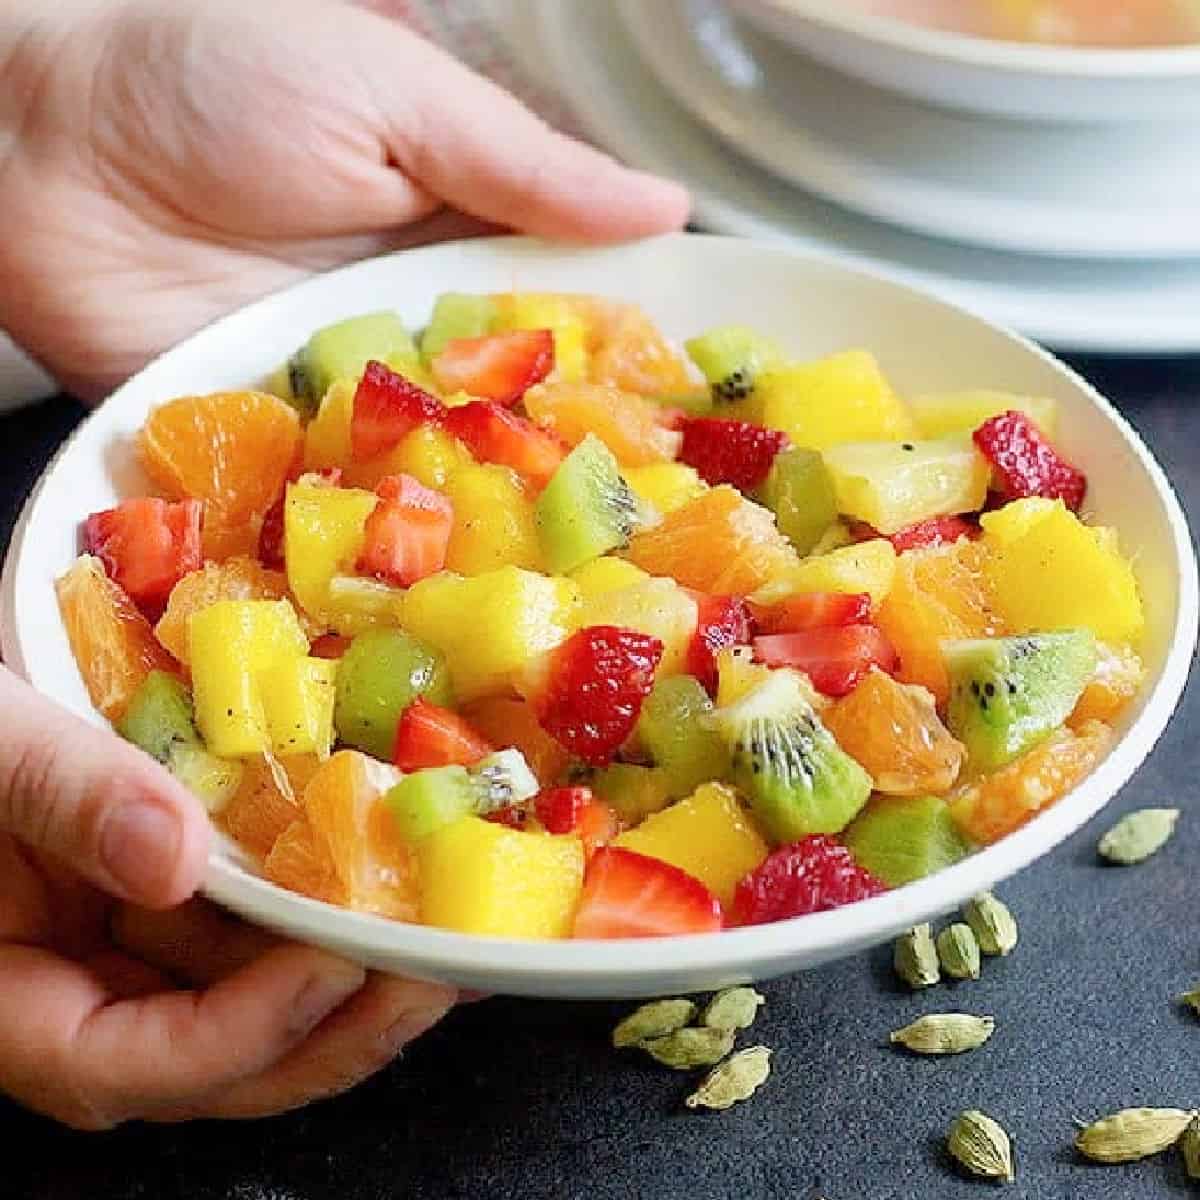 This Honey Rose Water Fruit Salad will make your days colorful and delicious. Make a big batch of these for your party and enjoy the delicious honey rose water flavor. It's like eating spring!
